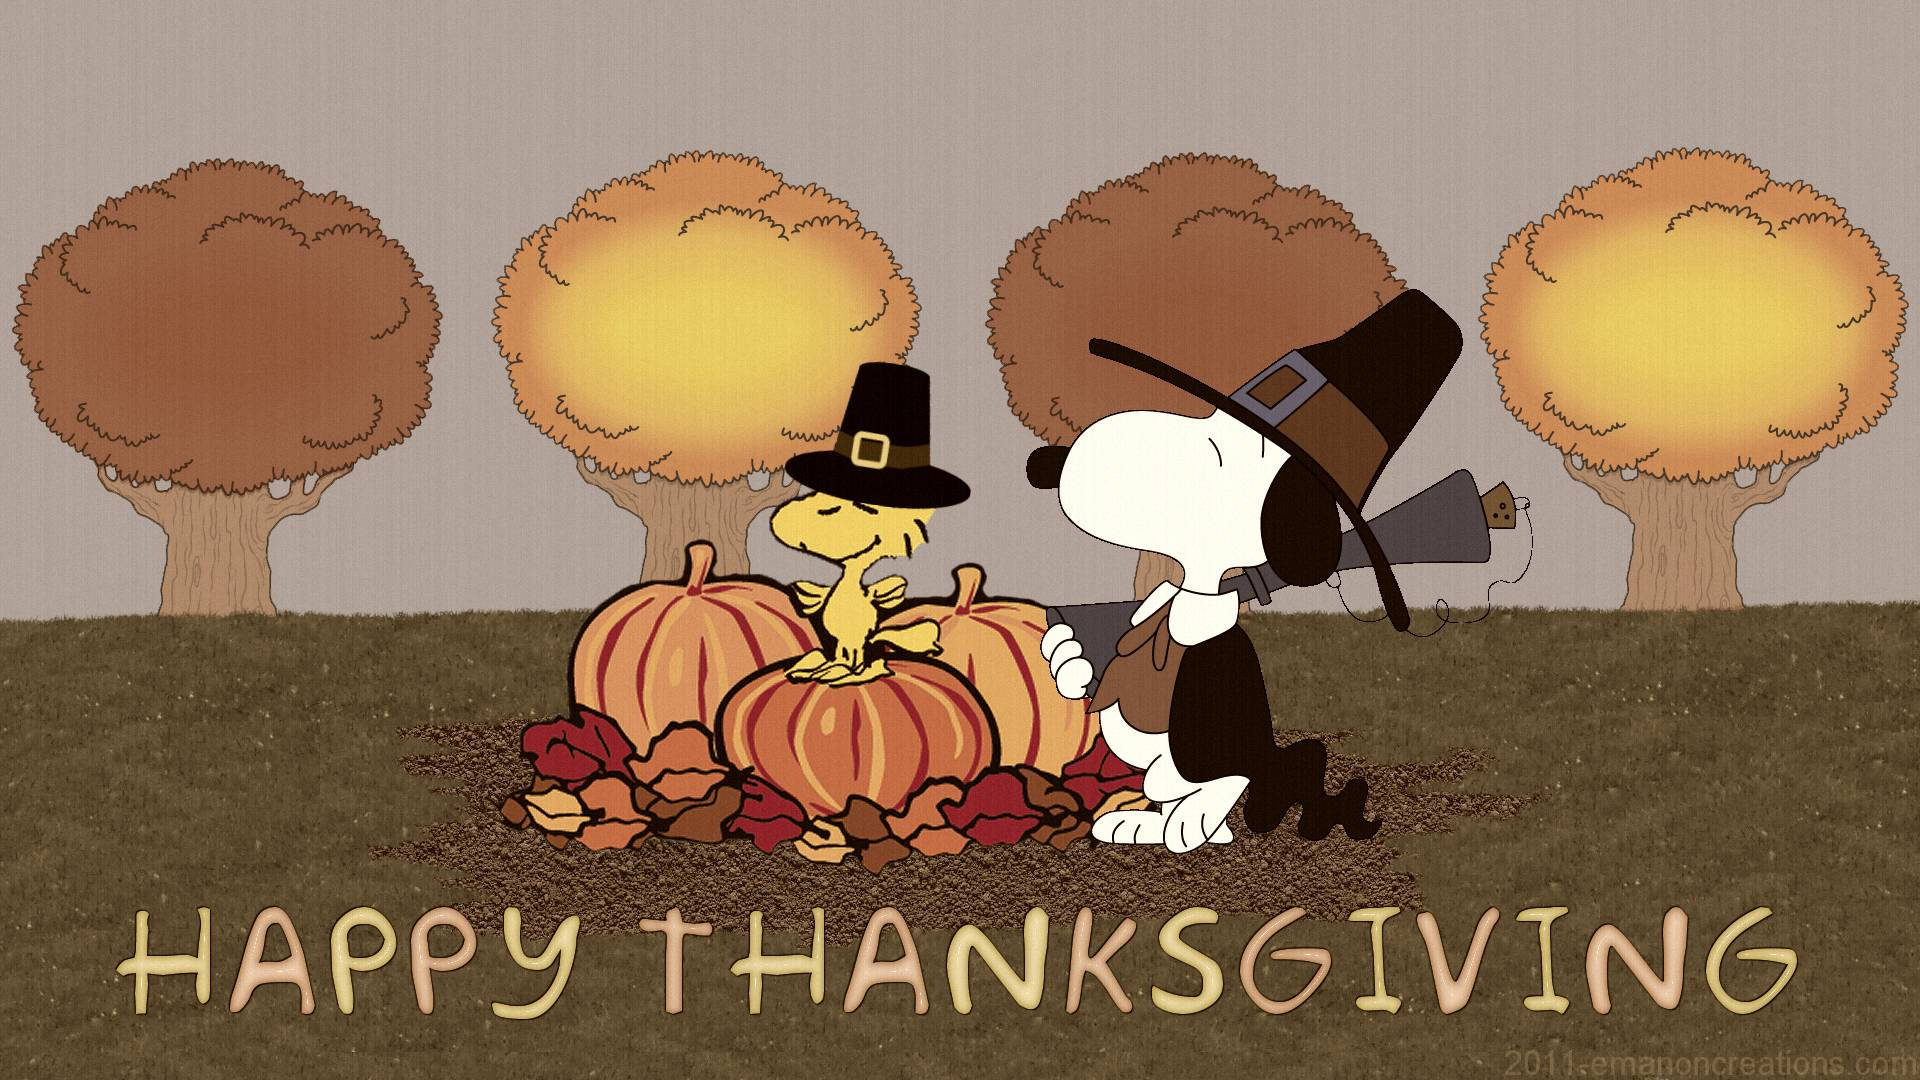 1920x1080 Download Thanksgiving Woodstock And Snoopy Wallpaper